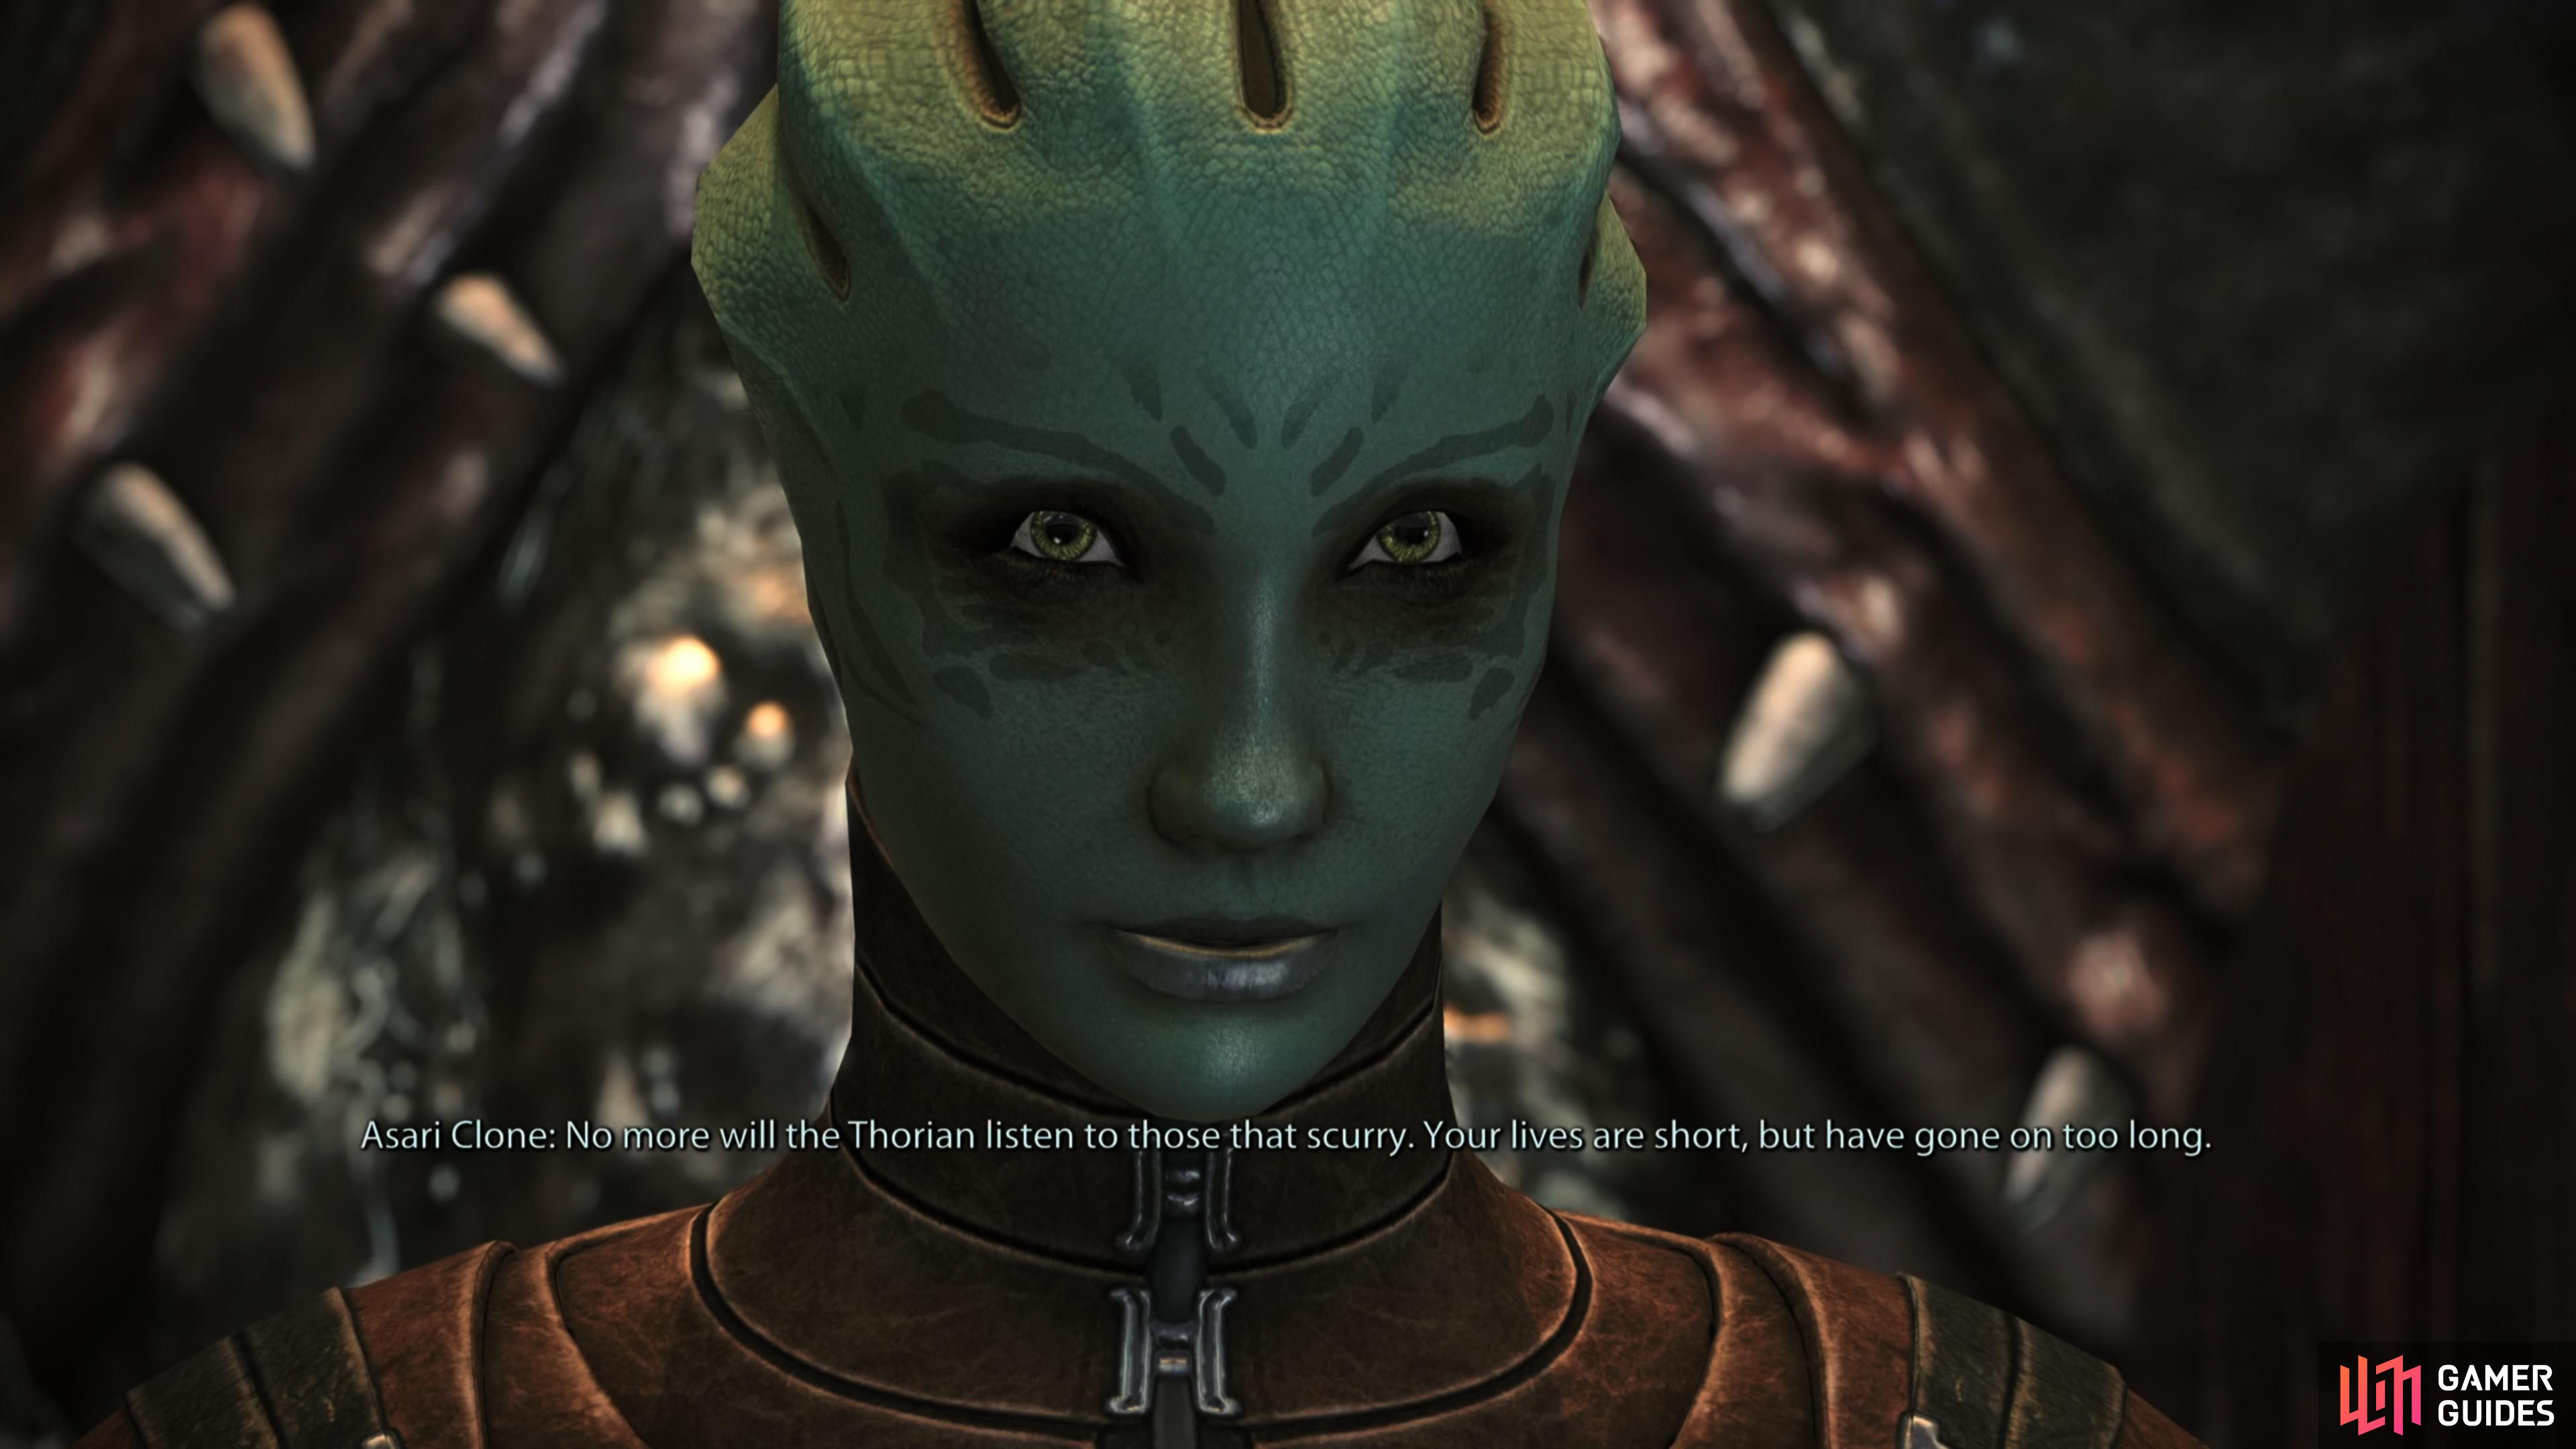 The Thorian will speak to you via an Asari Clone. Suffice to say, you're not going to be friends.